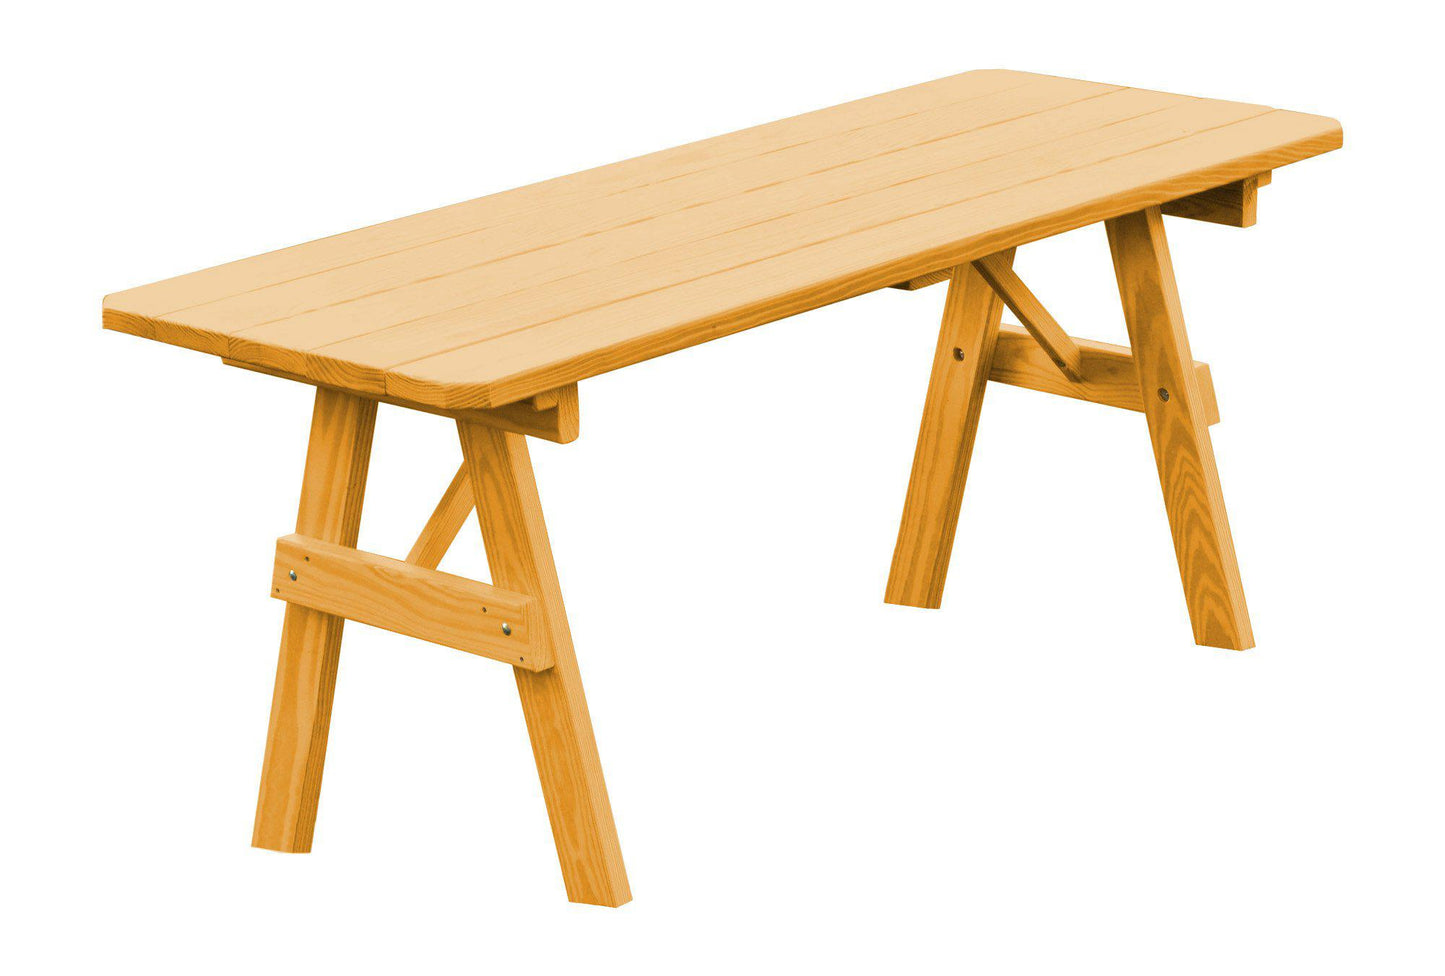 A&L Furniture Co. Pressure Treated Pine 8' Traditional Table Only - LEAD TIME TO SHIP 10 BUSINESS DAYS